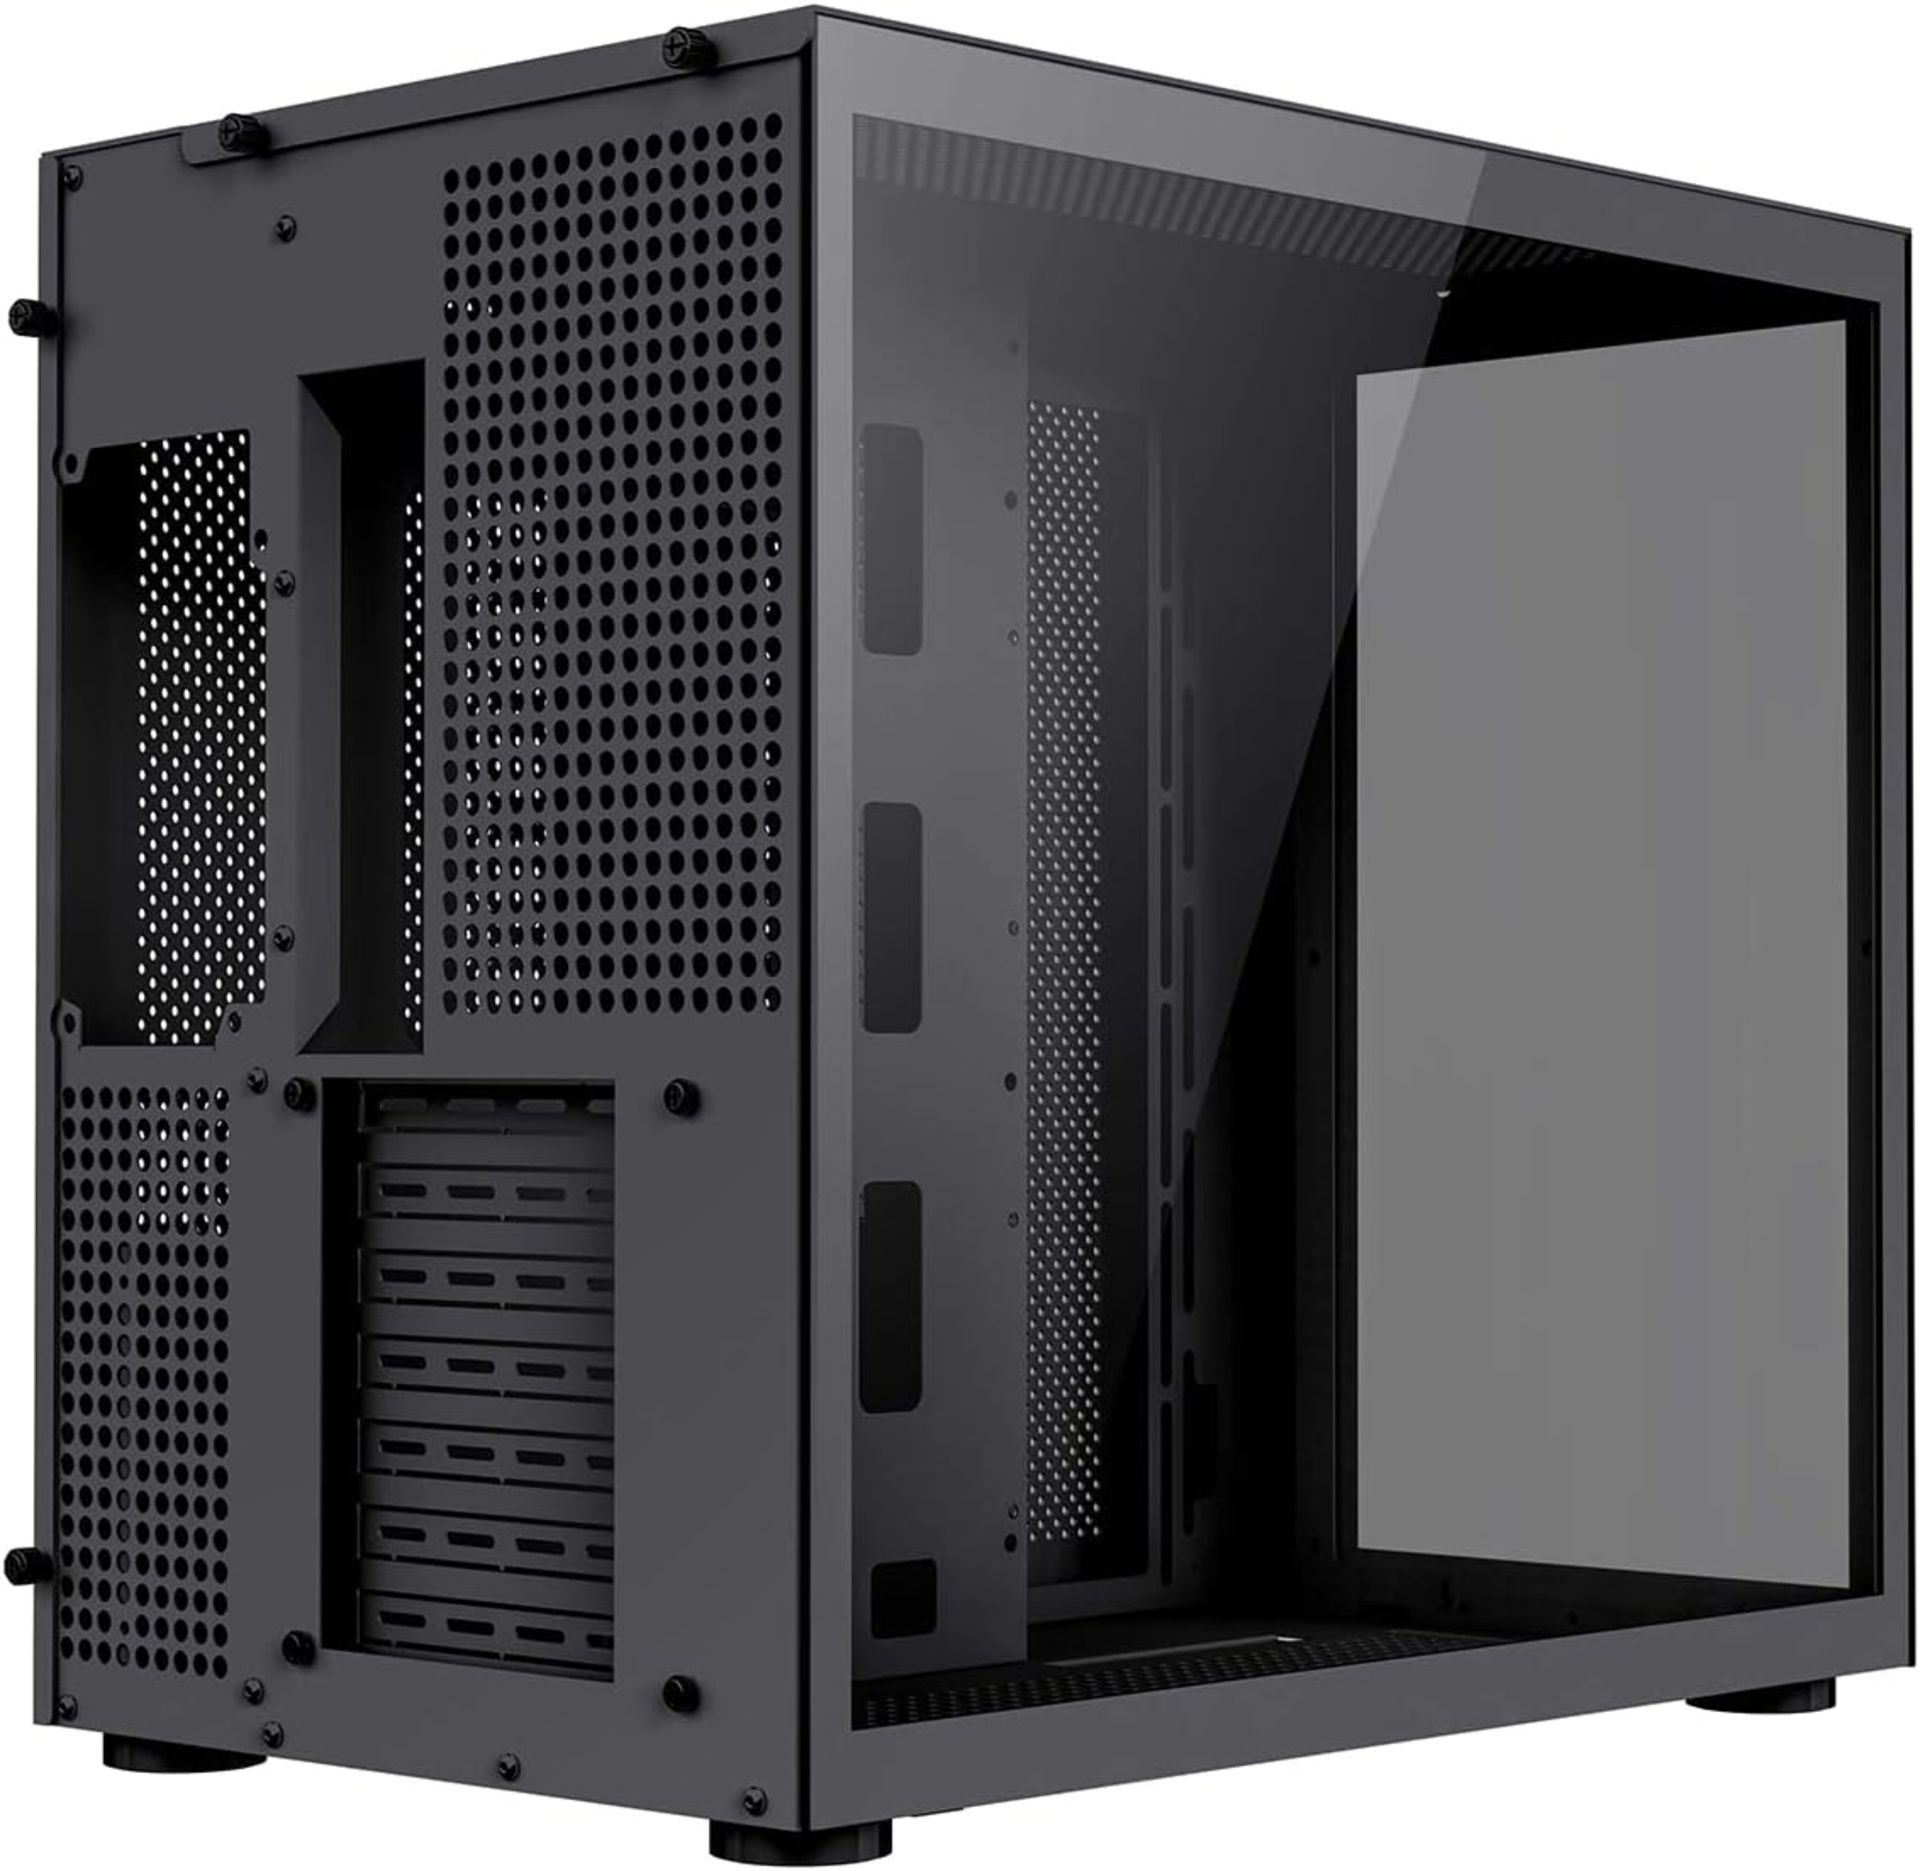 NEW & BOXED GAMEMAX Infinity Tempered Glass Mid-Tower ATX Case - BLACK. RRP £74.99. Stand out with - Image 3 of 8